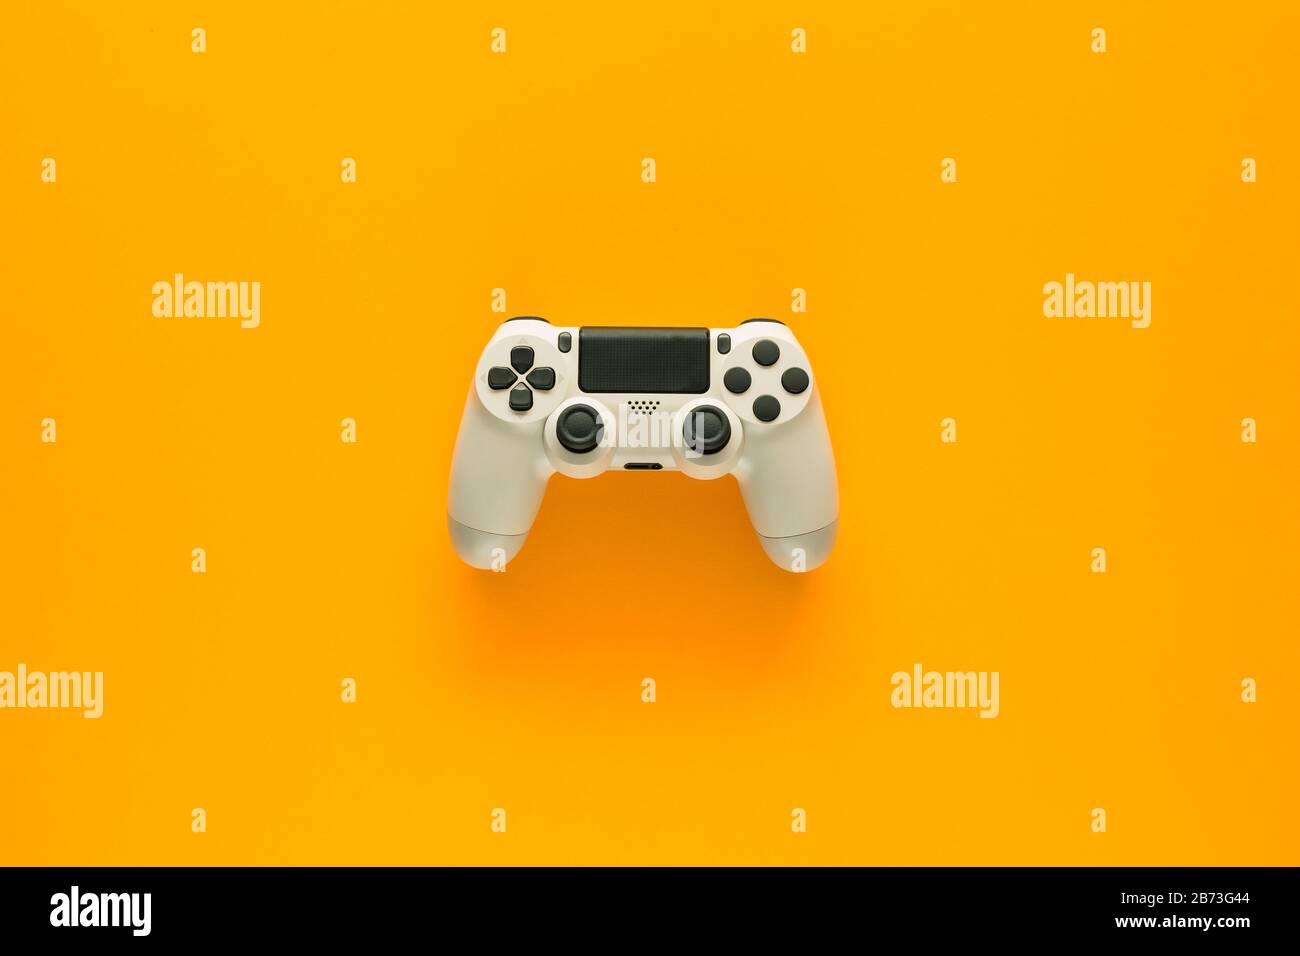 Stock photo of a white gamepad in the middle of a yellow background Stock Photo